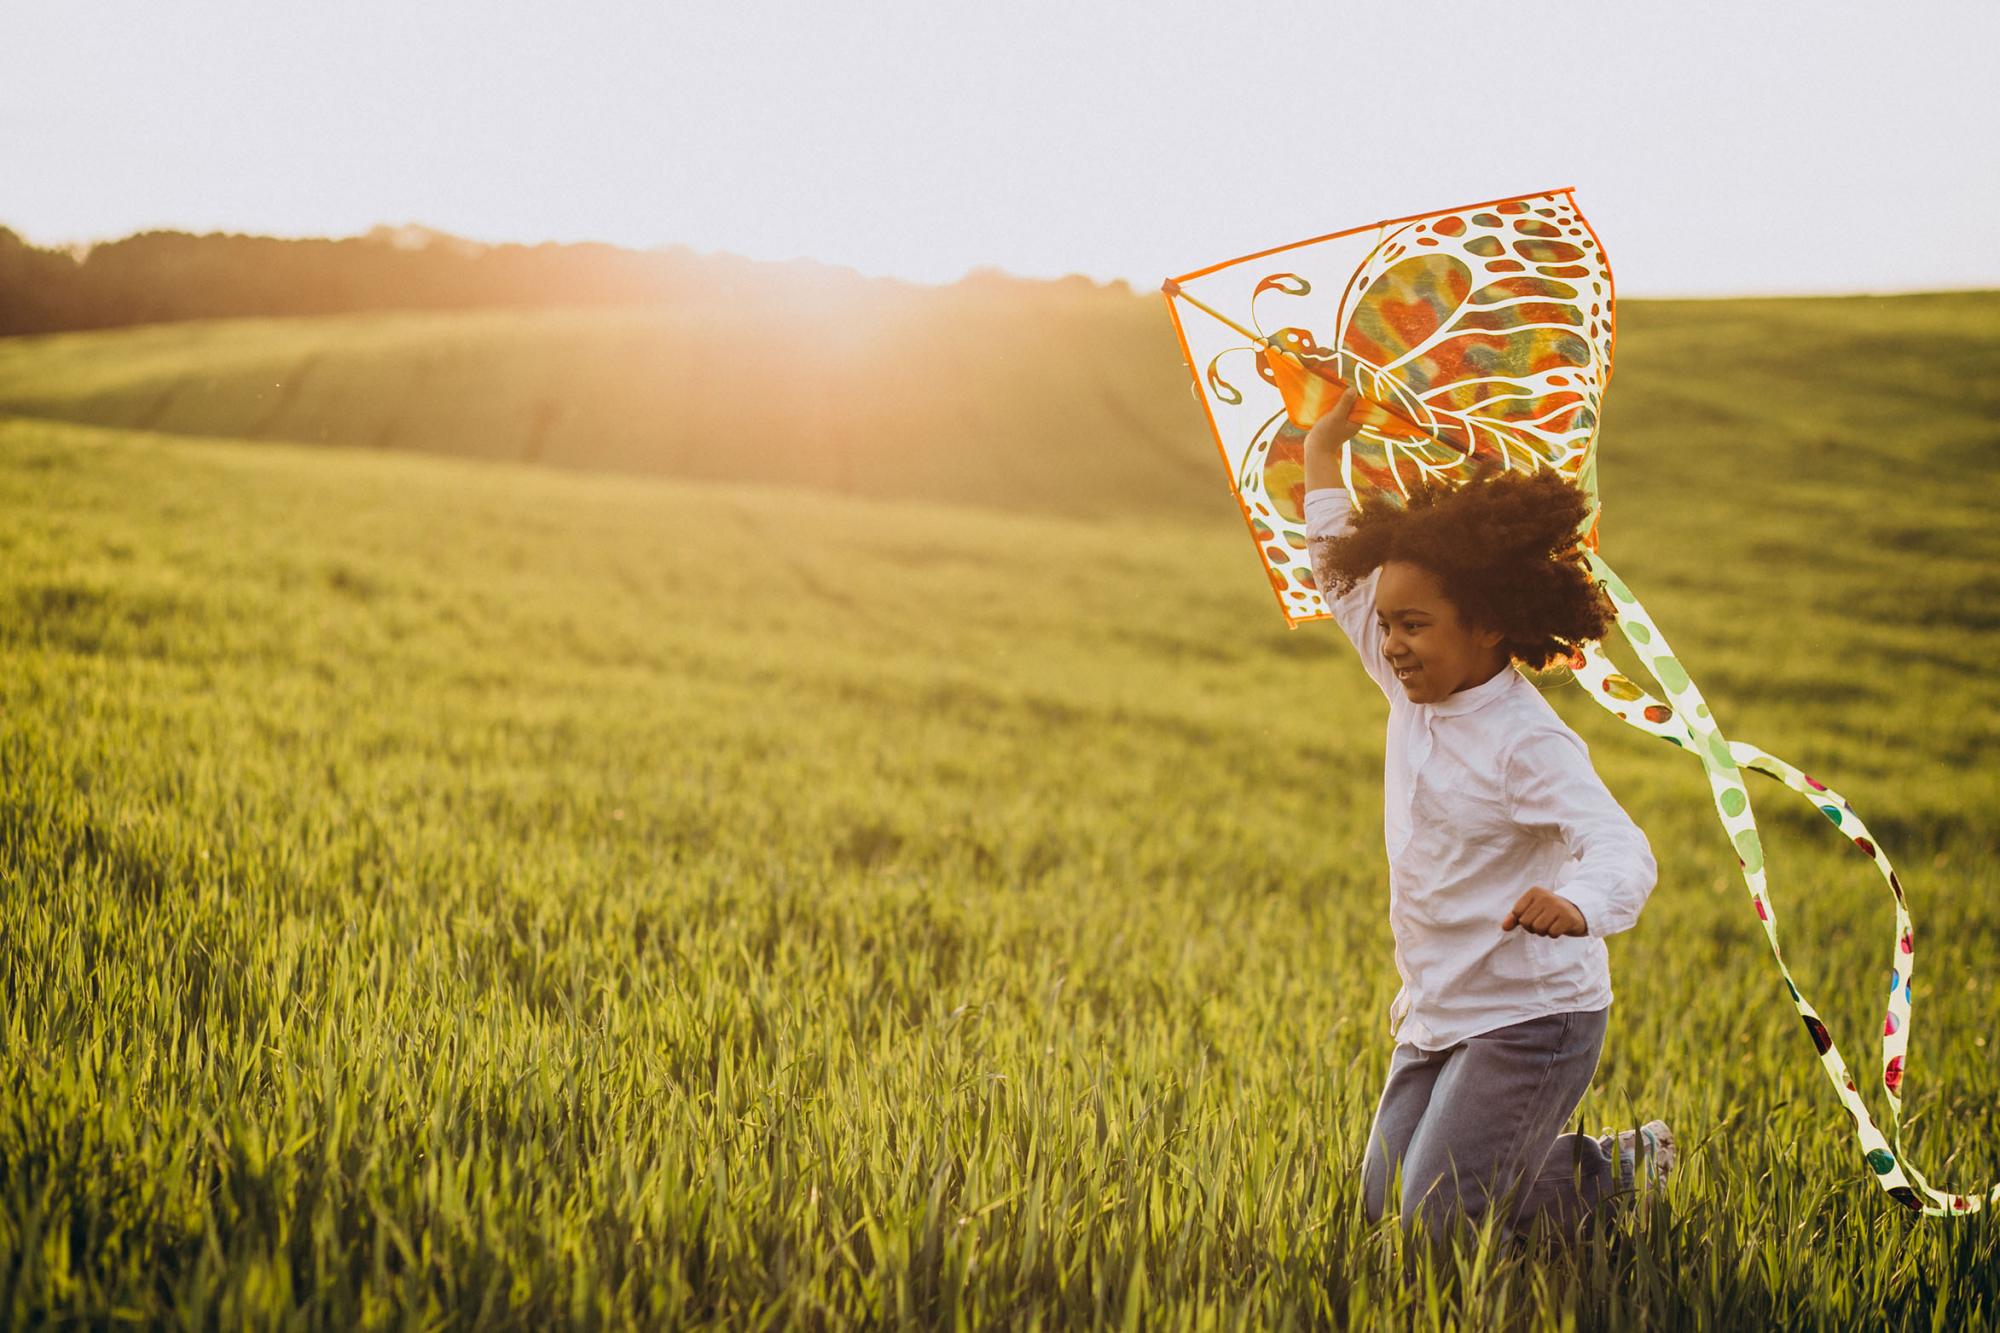 Child flying a kite in a field with the sun setting in the background